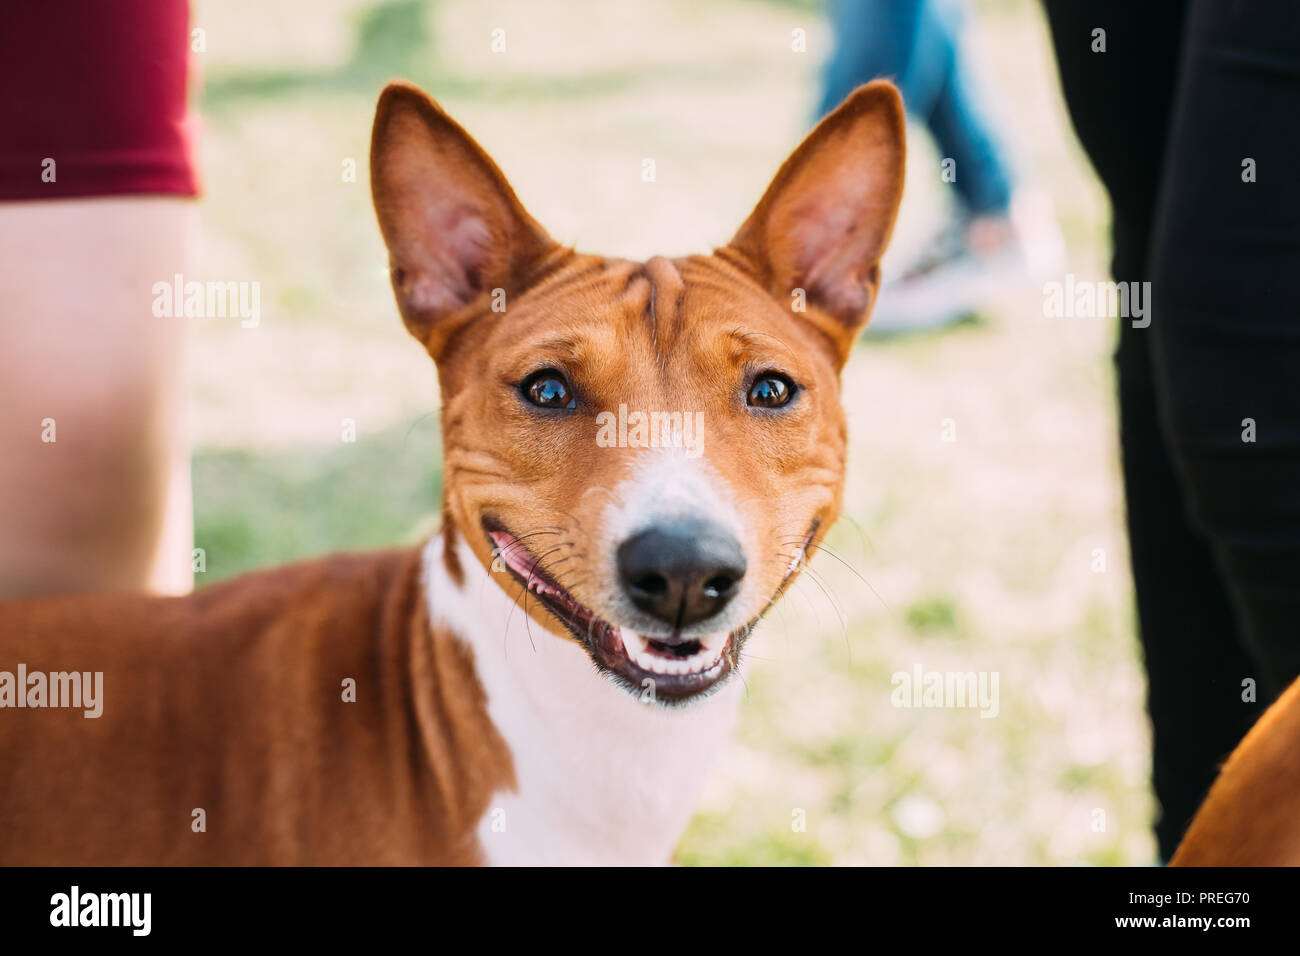 Basenji Kongo Terrier Dog. The Basenji Is A Breed Of Hunting Dog. It Was Bred From Stock That Originated In Central Africa. Smiling Dog. Stock Photo